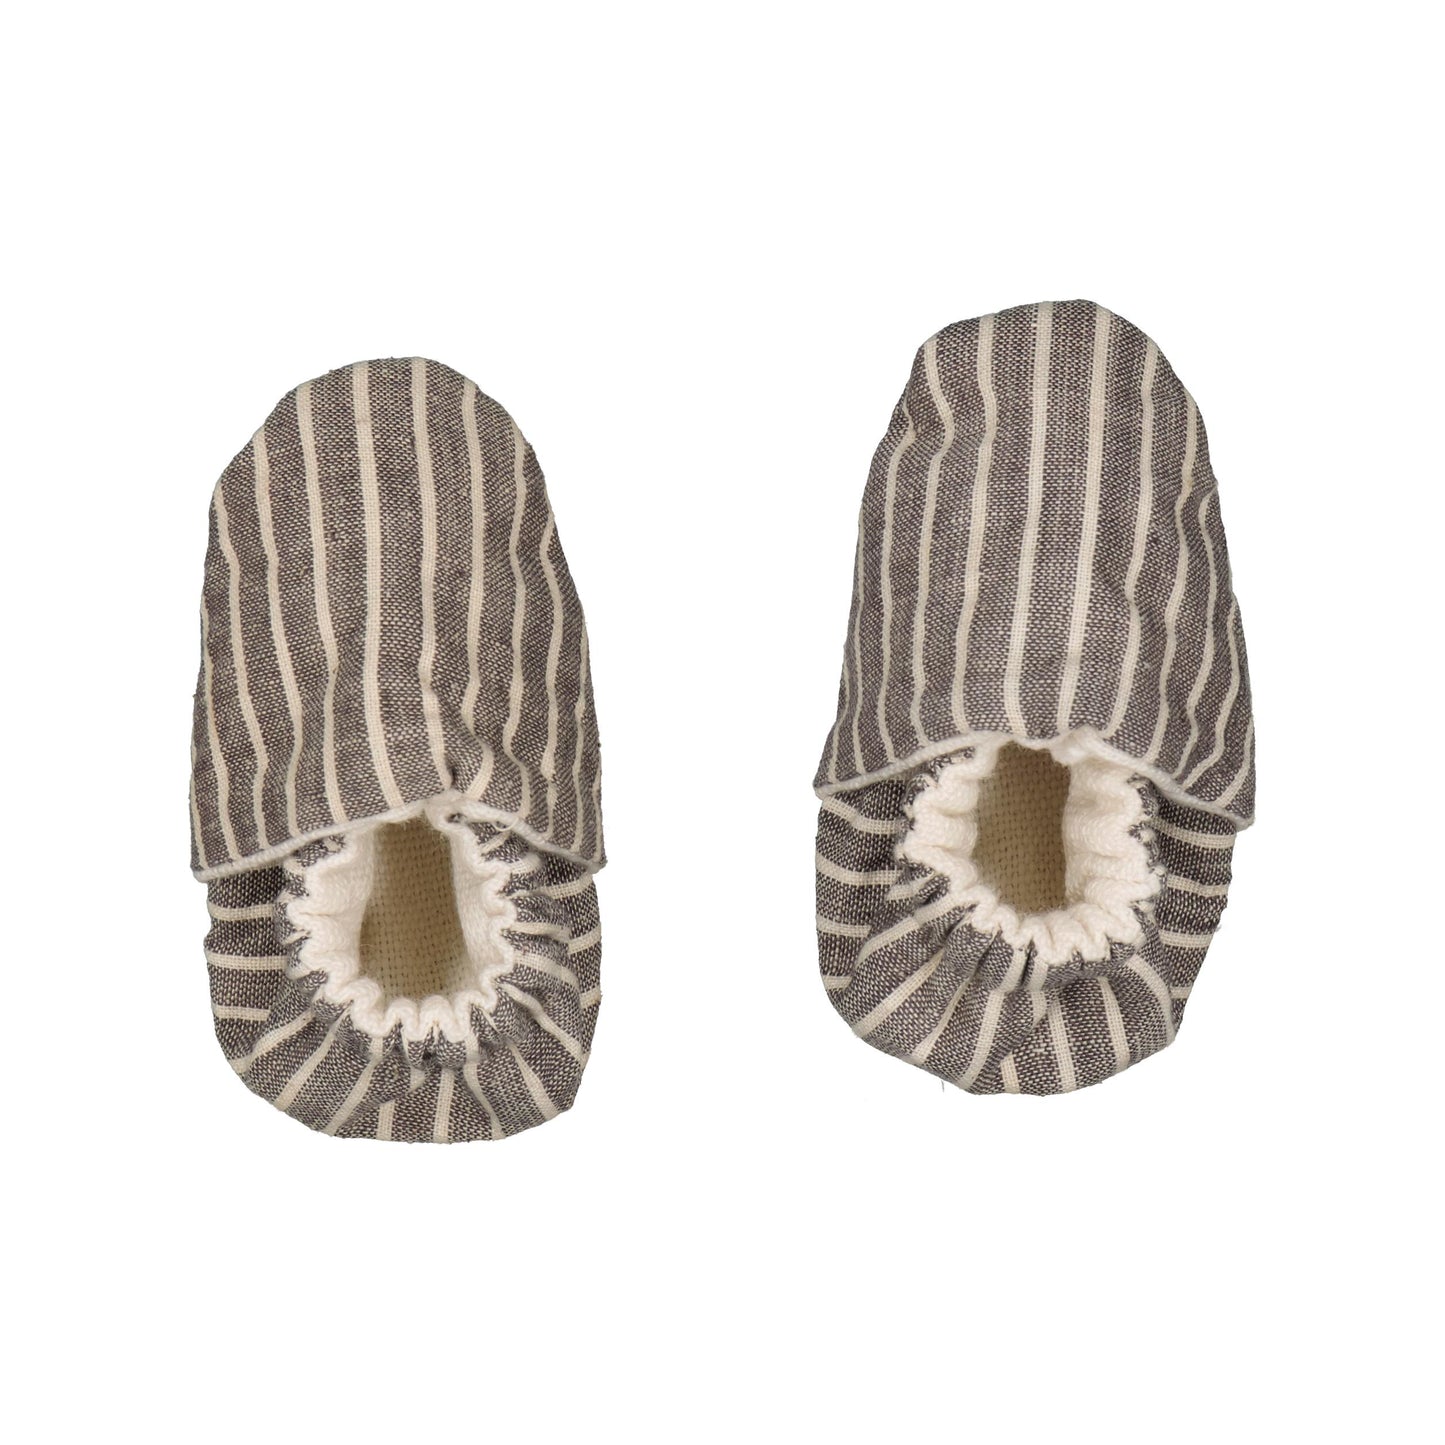 BABY SLIPPERS - 100% organic cotton STRIPES - GREY